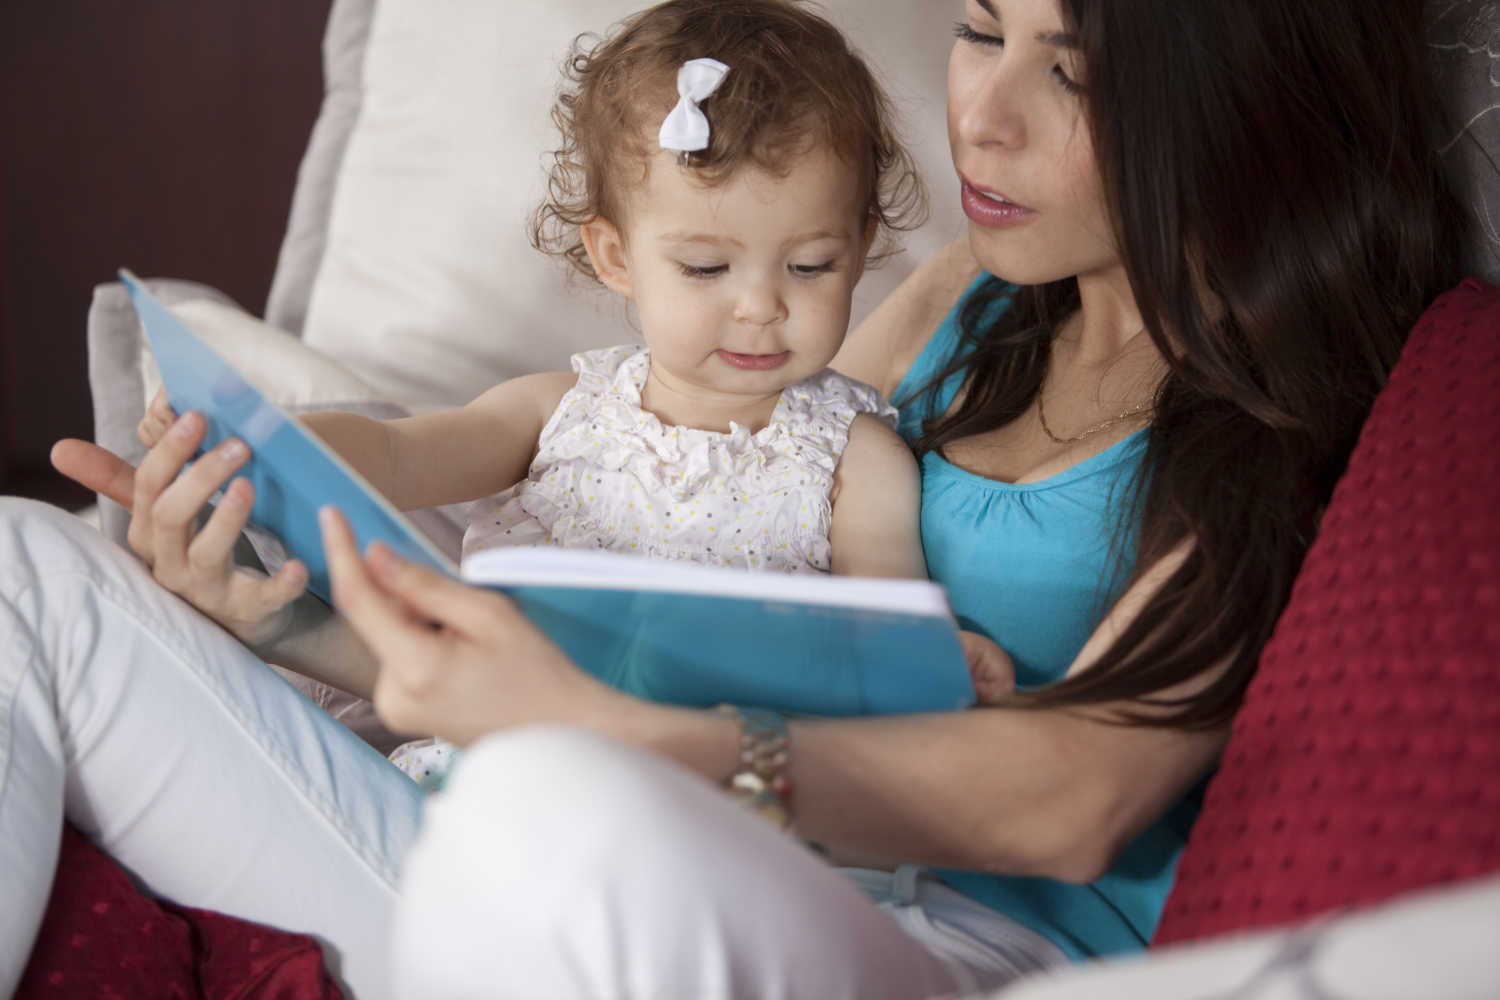 Top 8 Best Bedtime Story Books For Babies in First Year